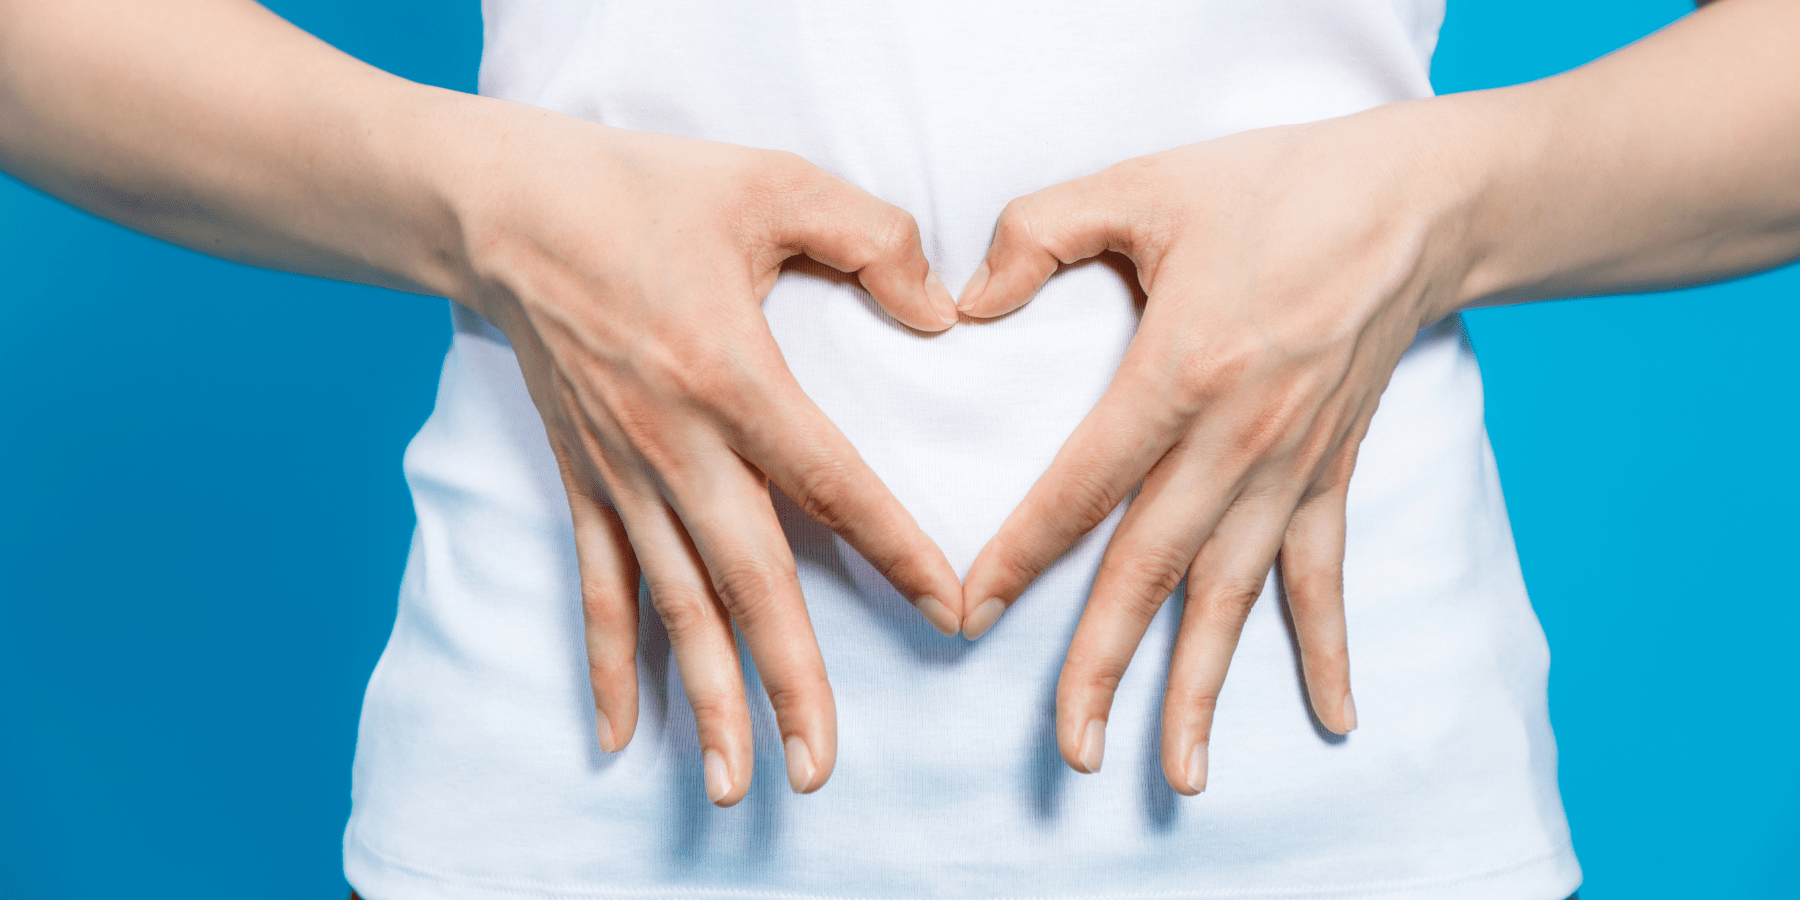 Fingers in the shape of a heart on a woman's stomach